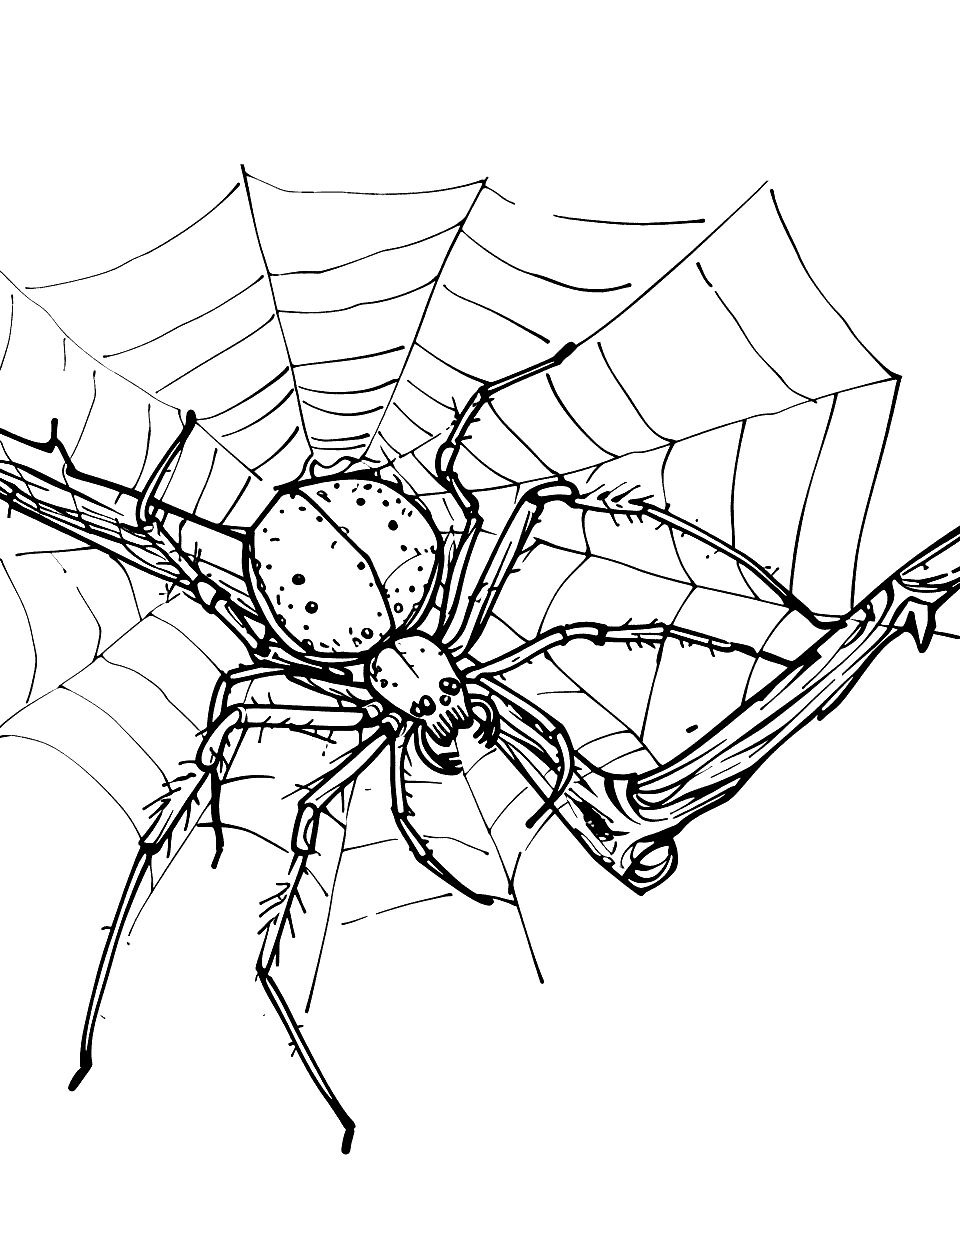 Spider Weaving Its Web Insect Coloring Page - A spider diligently spinning a web near twigs.